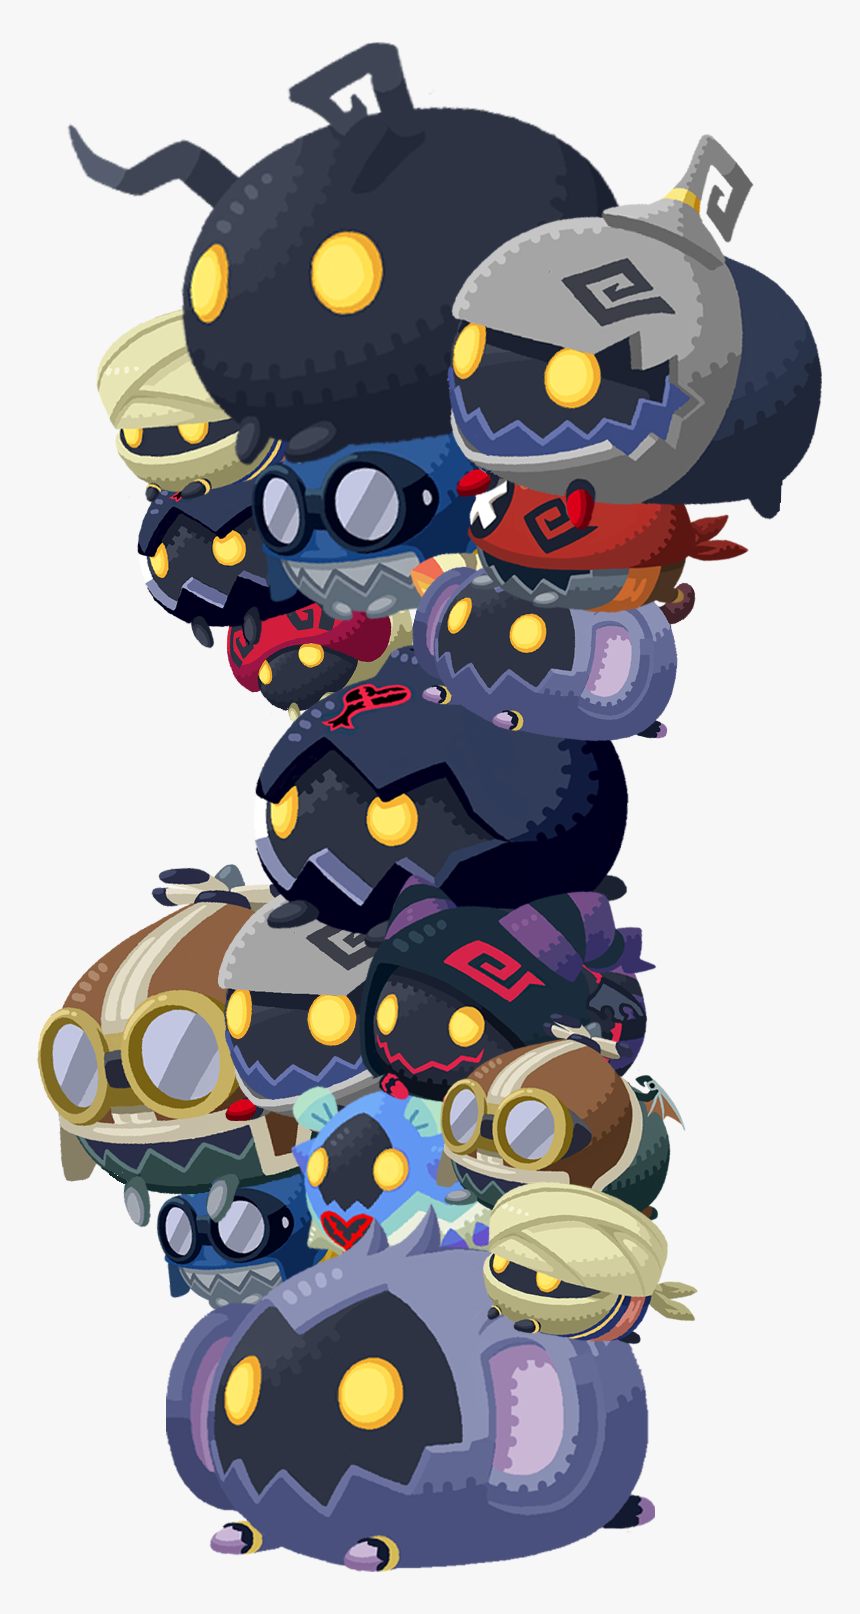 Heartless Tsum Khux - Heartless Kingdom Hearts Union X, HD Png Download, Free Download